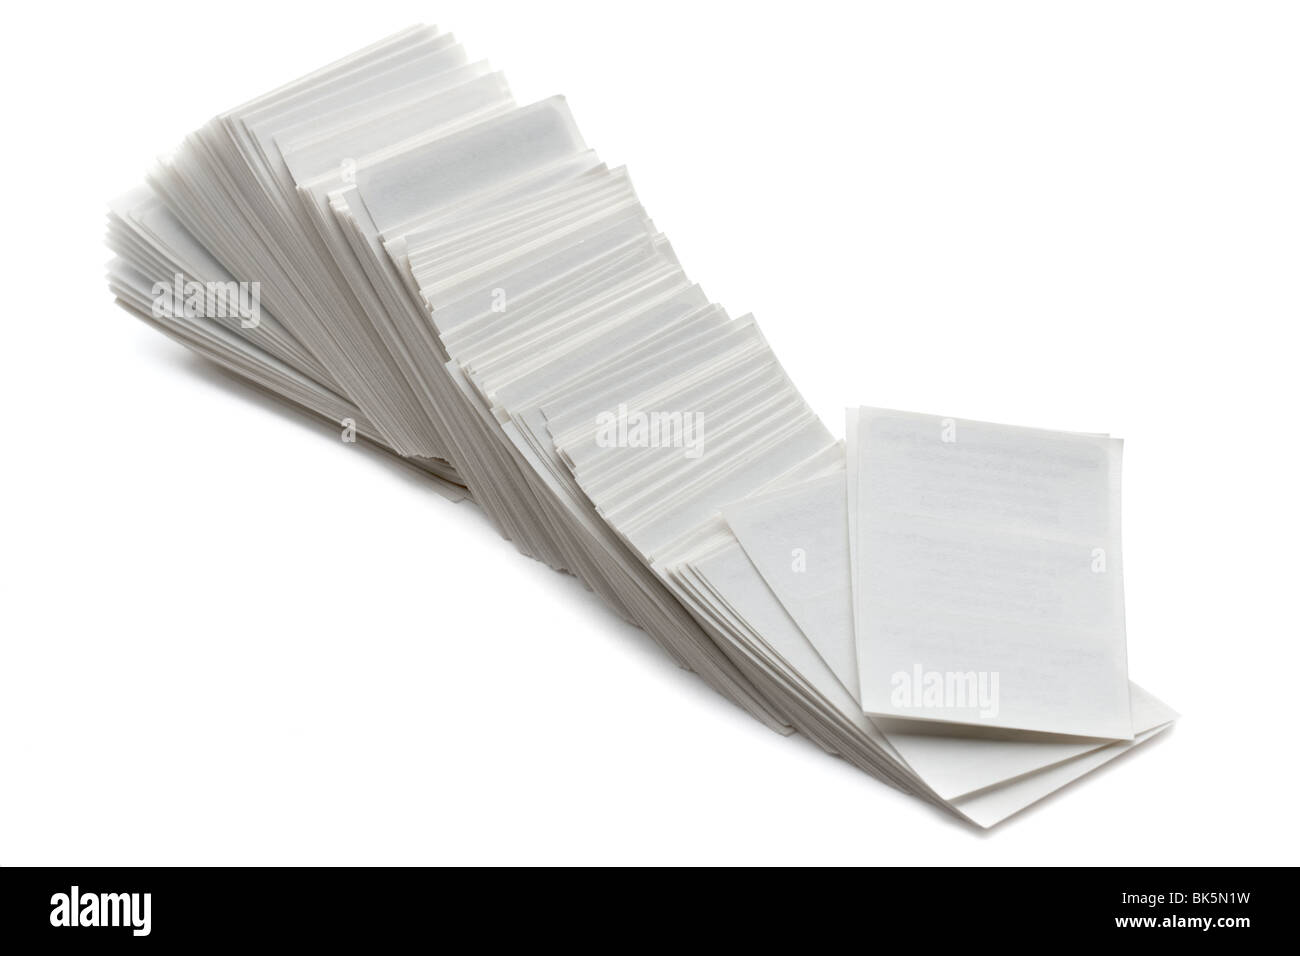 Pile of white sticky backed business labels Stock Photo